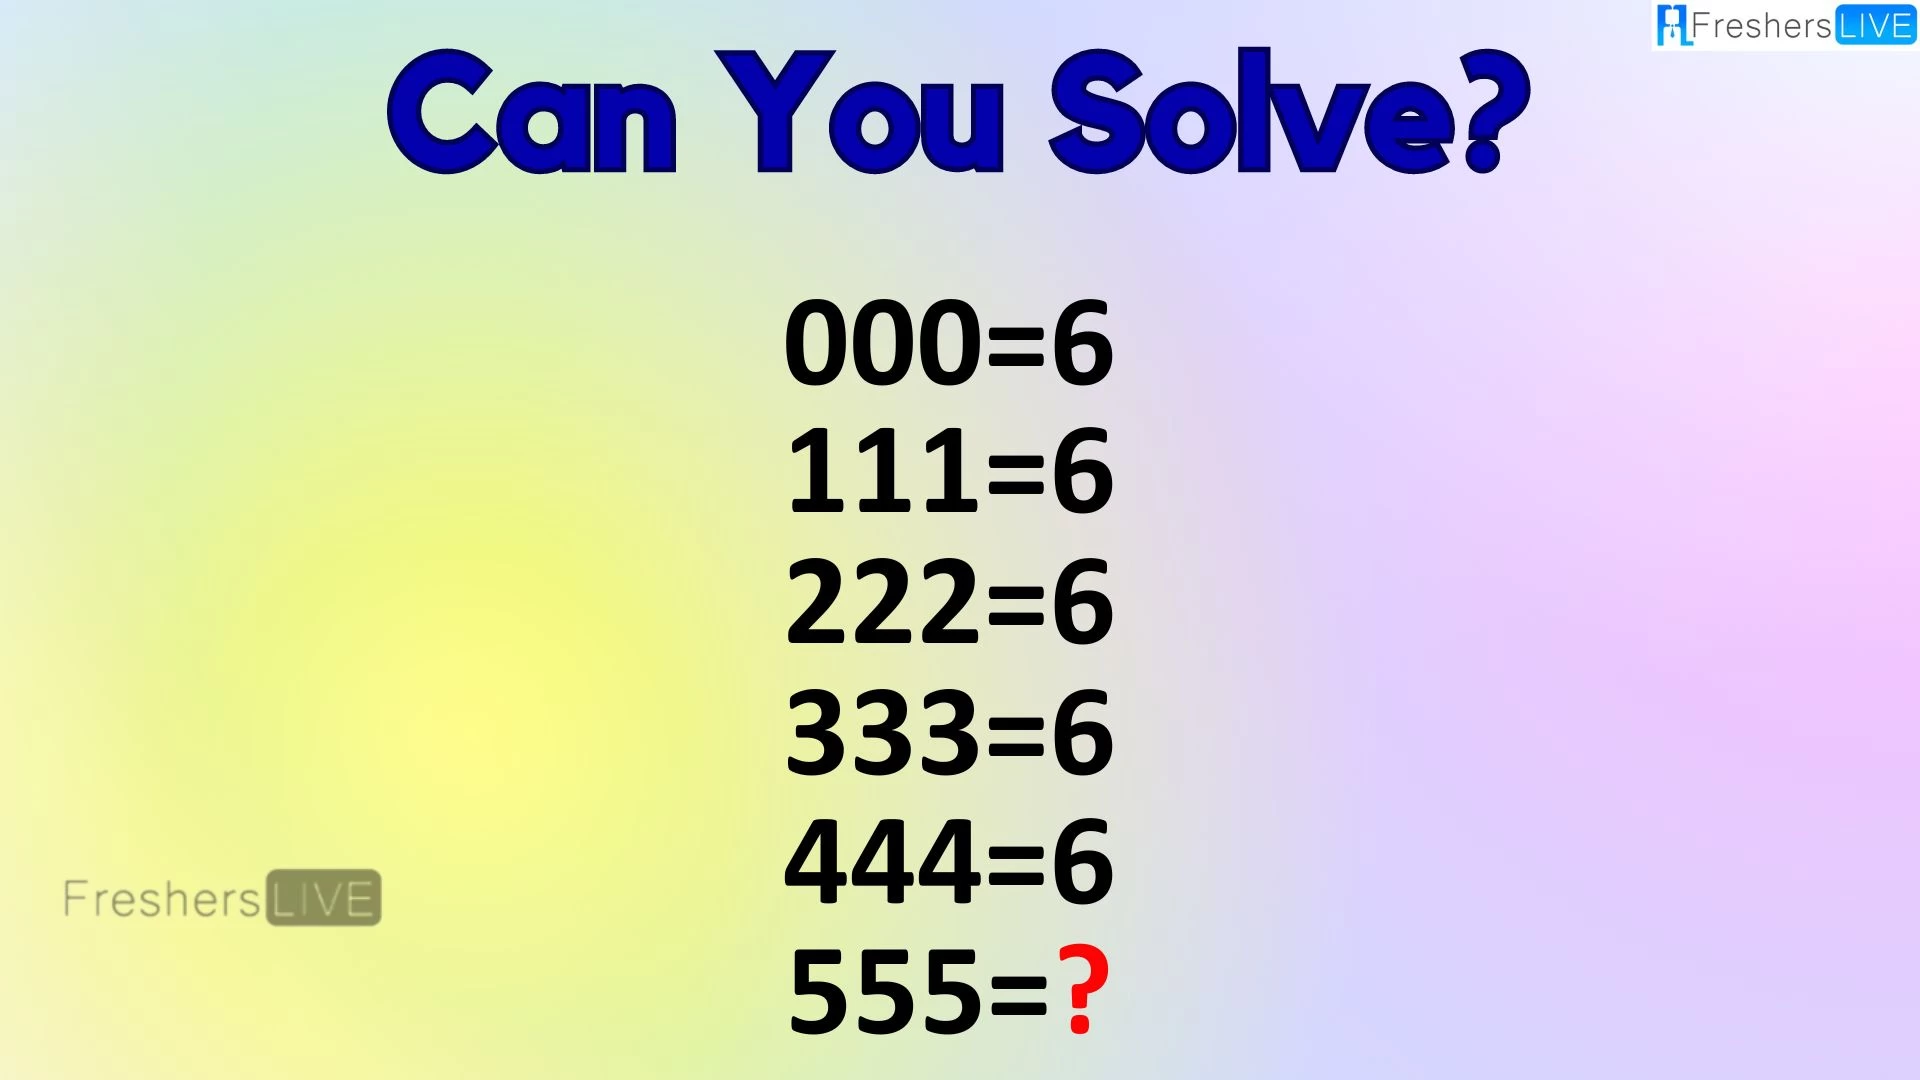 How Do You Solve The 6s Challenge?